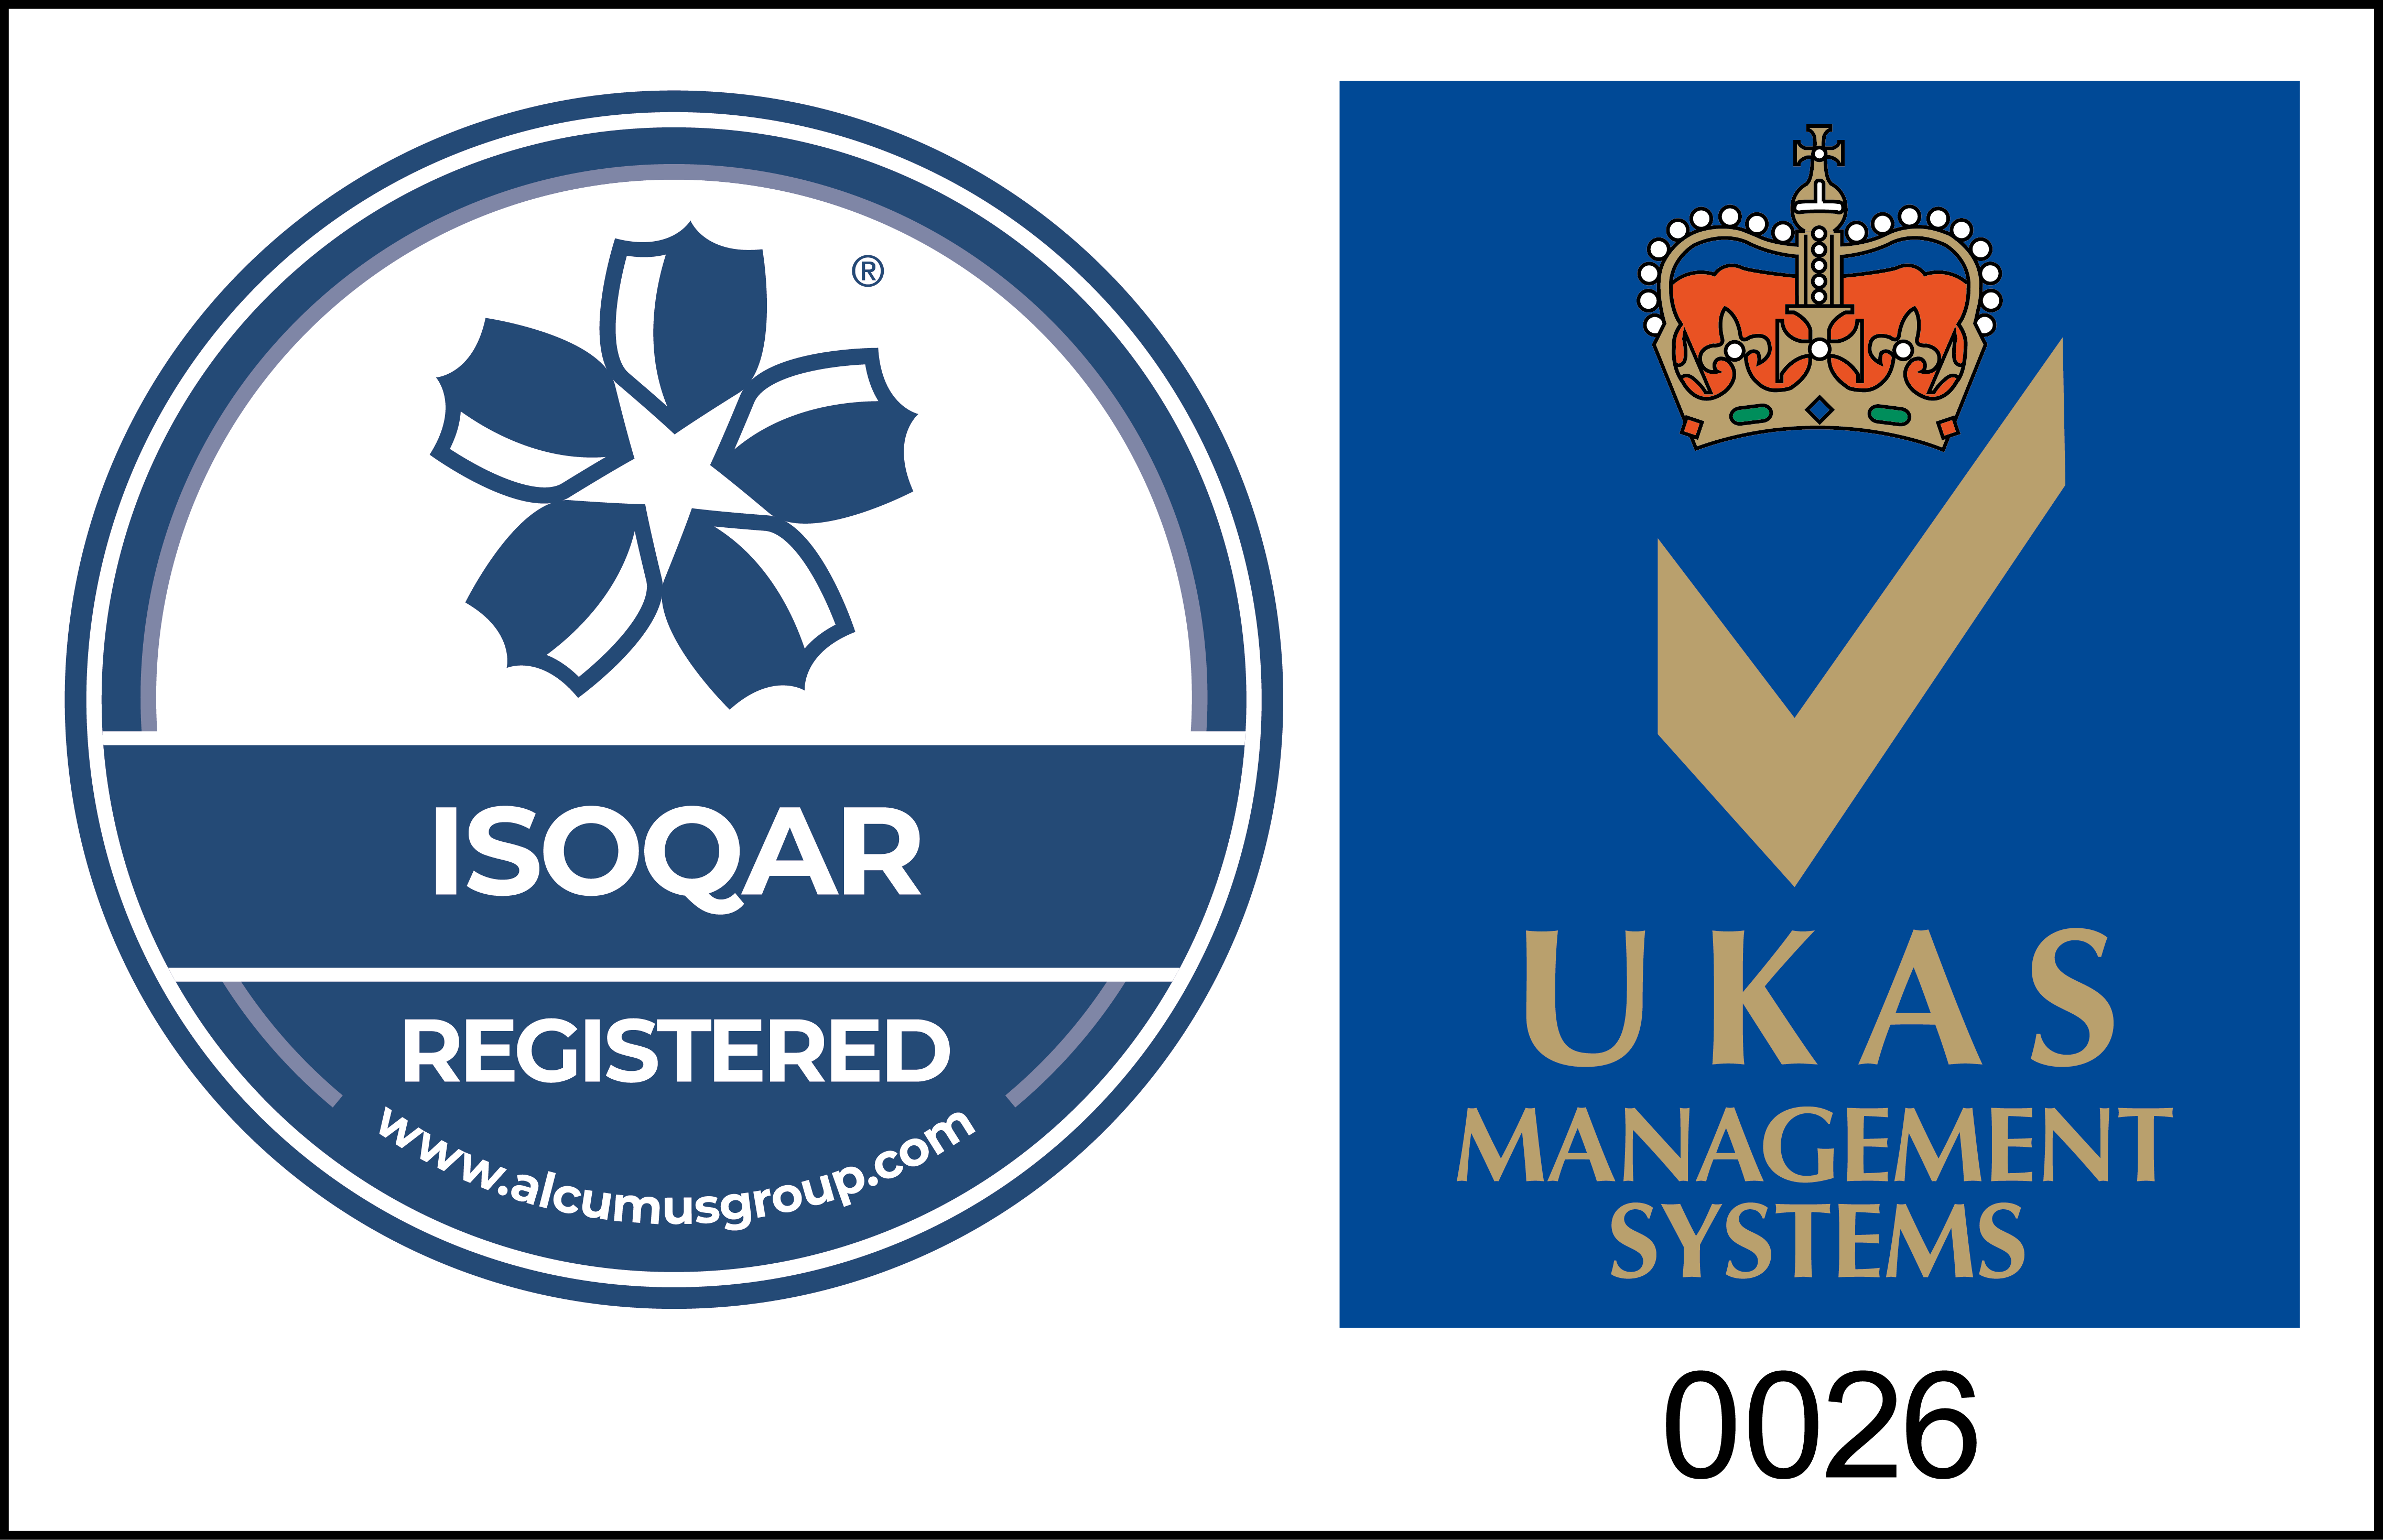 Why choose UKAS Certification?